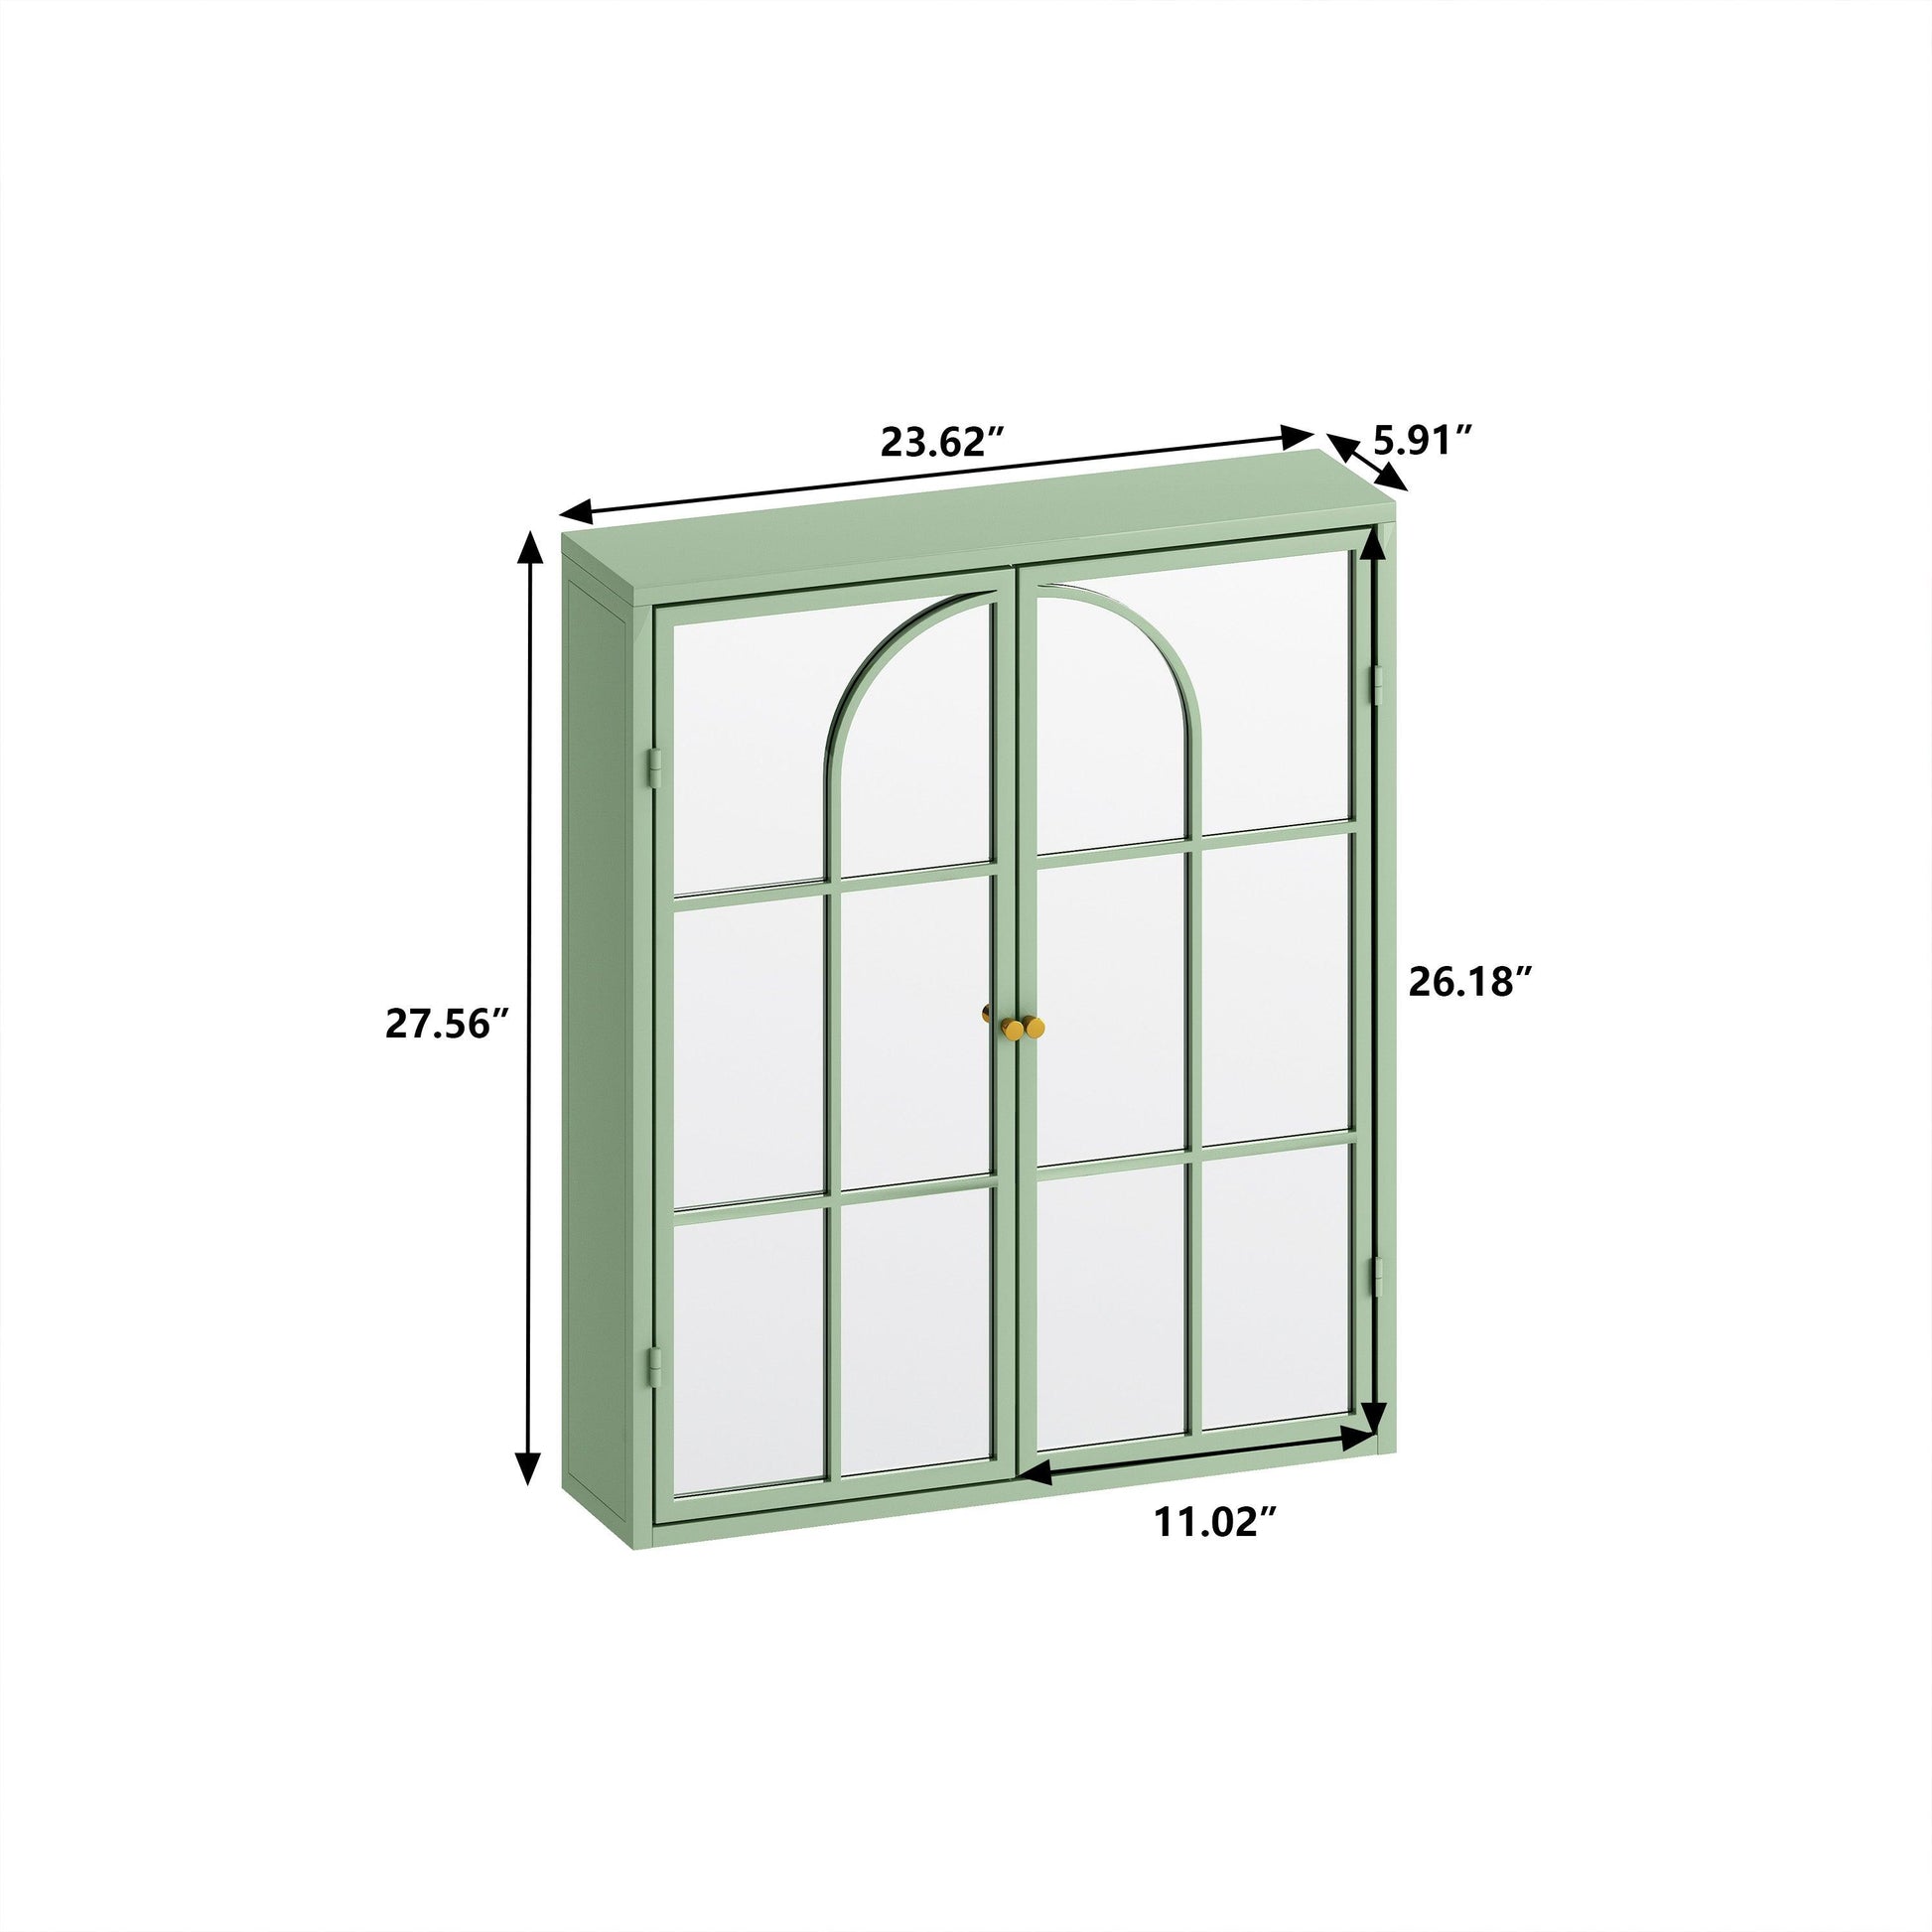 23.62 "Vintage Two Door Wall Cabinet with Mirror Three-level Entrance Storage Space Green - FurniFindUSA